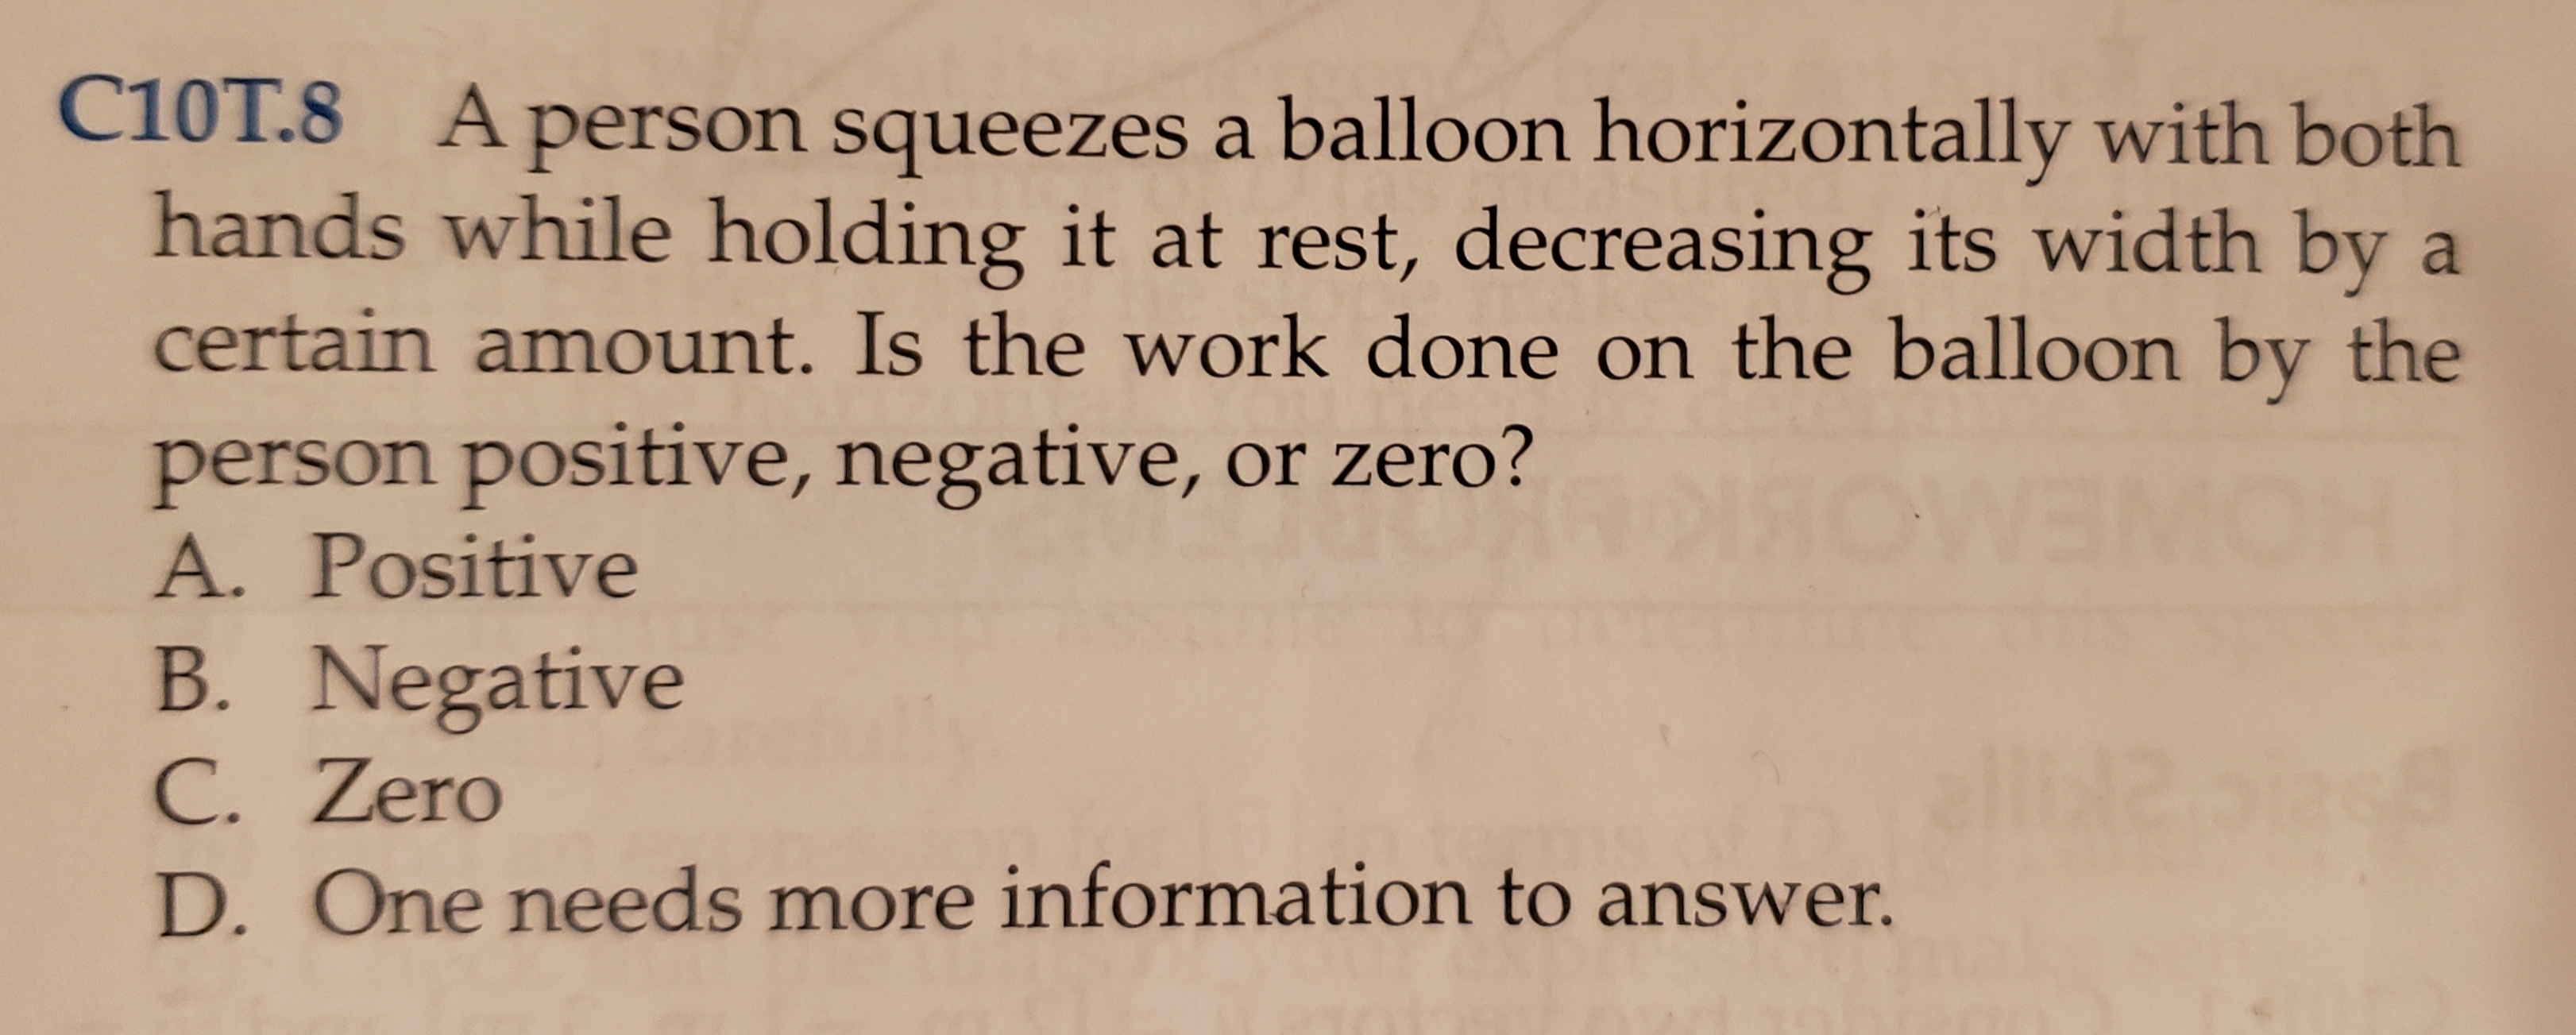 C10T.8 A person squeezes a balloon horizontally with both
hands while holding it at rest, decreasing its width by a
certain amount. Is the work done orn the balloon by the
person positive, negative, or zero?
A. Positive
OWEO
B. Negative
C. Zero
D. One needs more information to answer.
